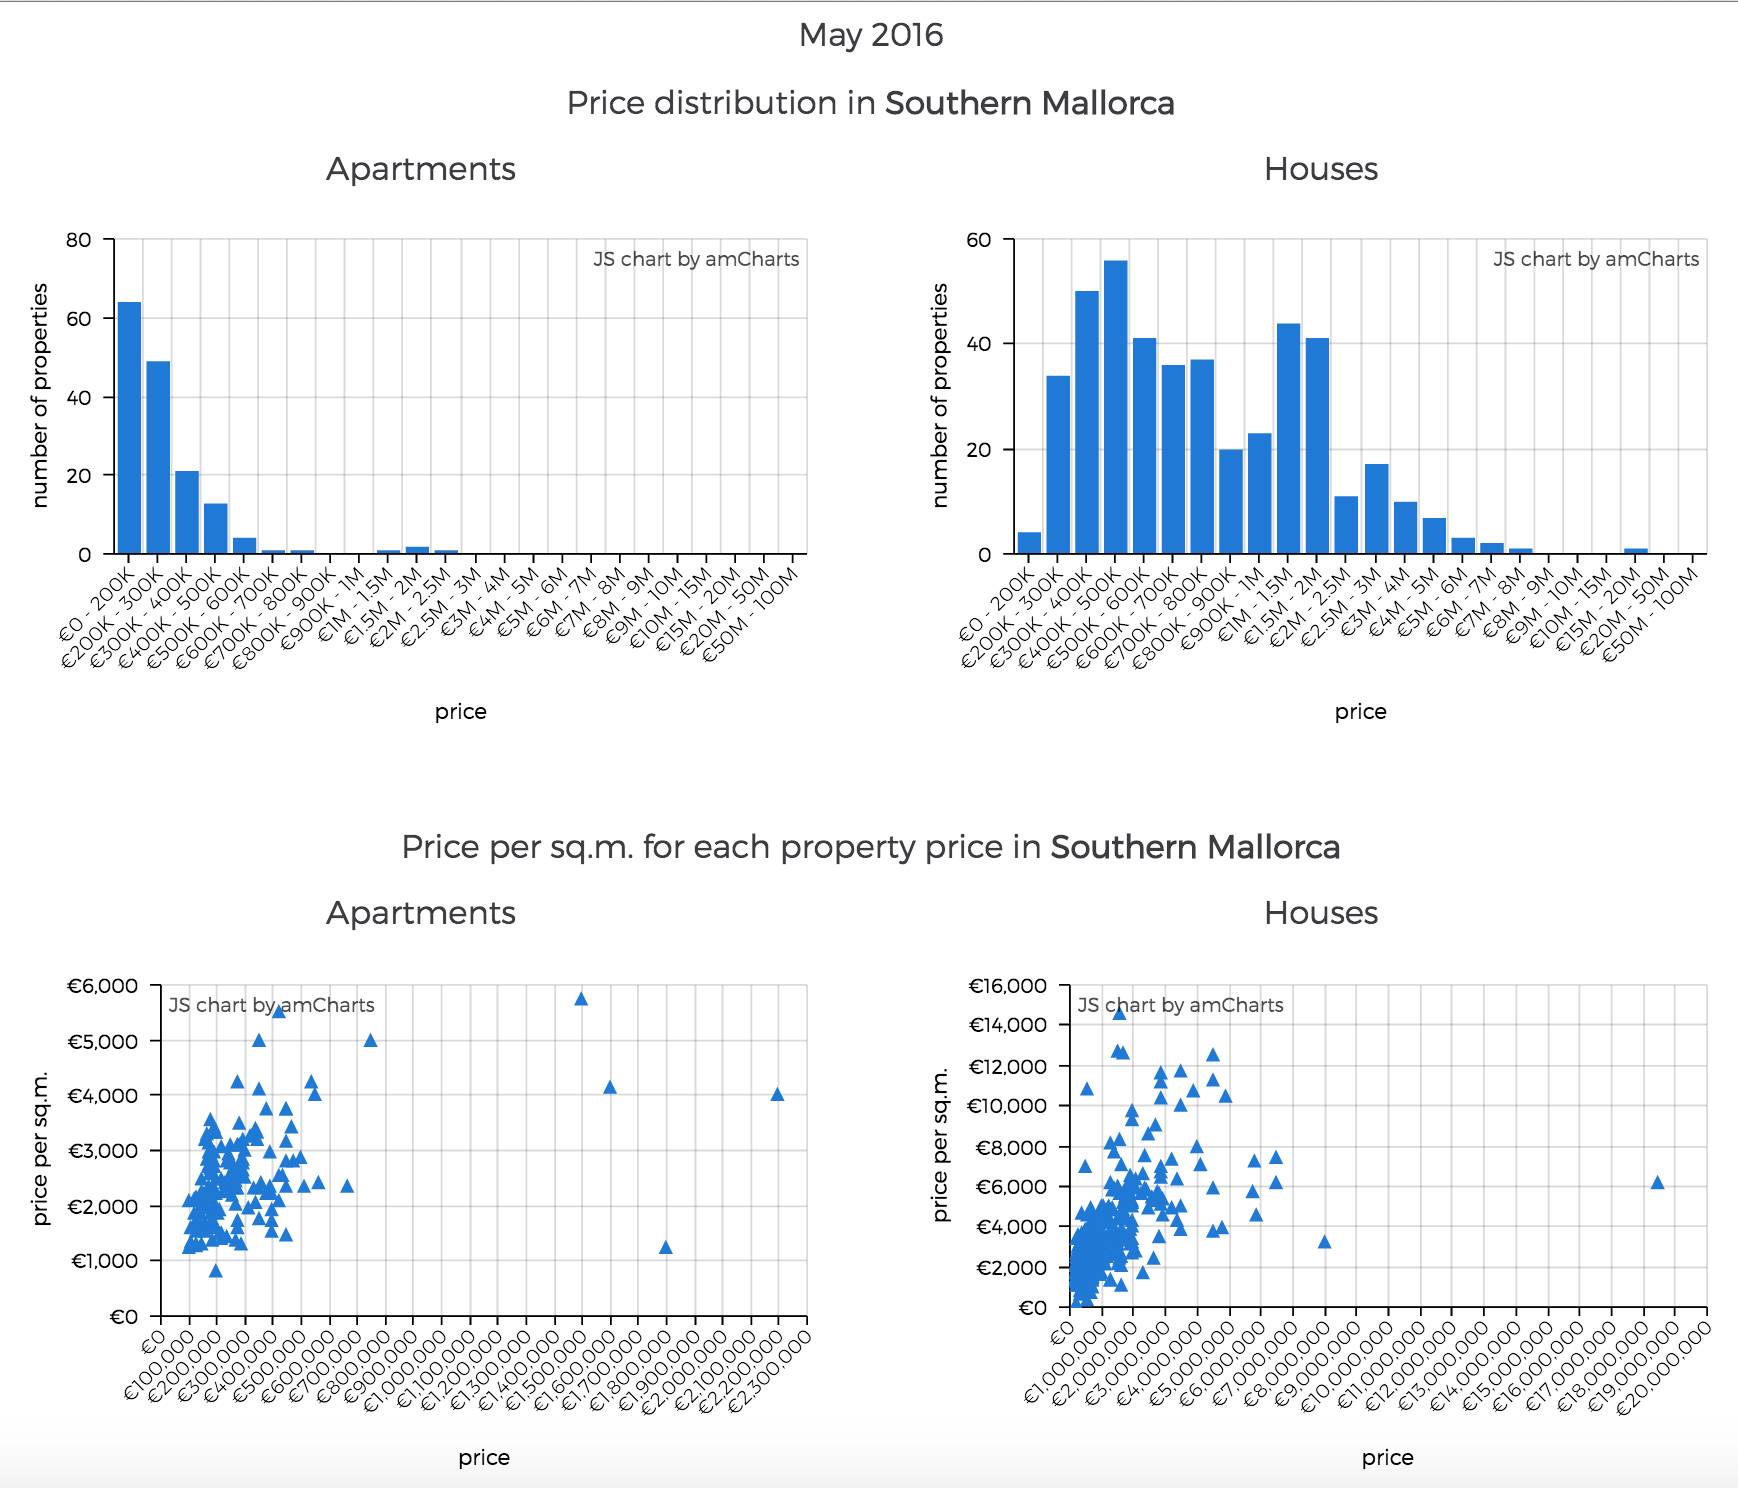 Graphic showing the price distribution and price per square-meter for Mallorca, crucial for real estate market analysis.